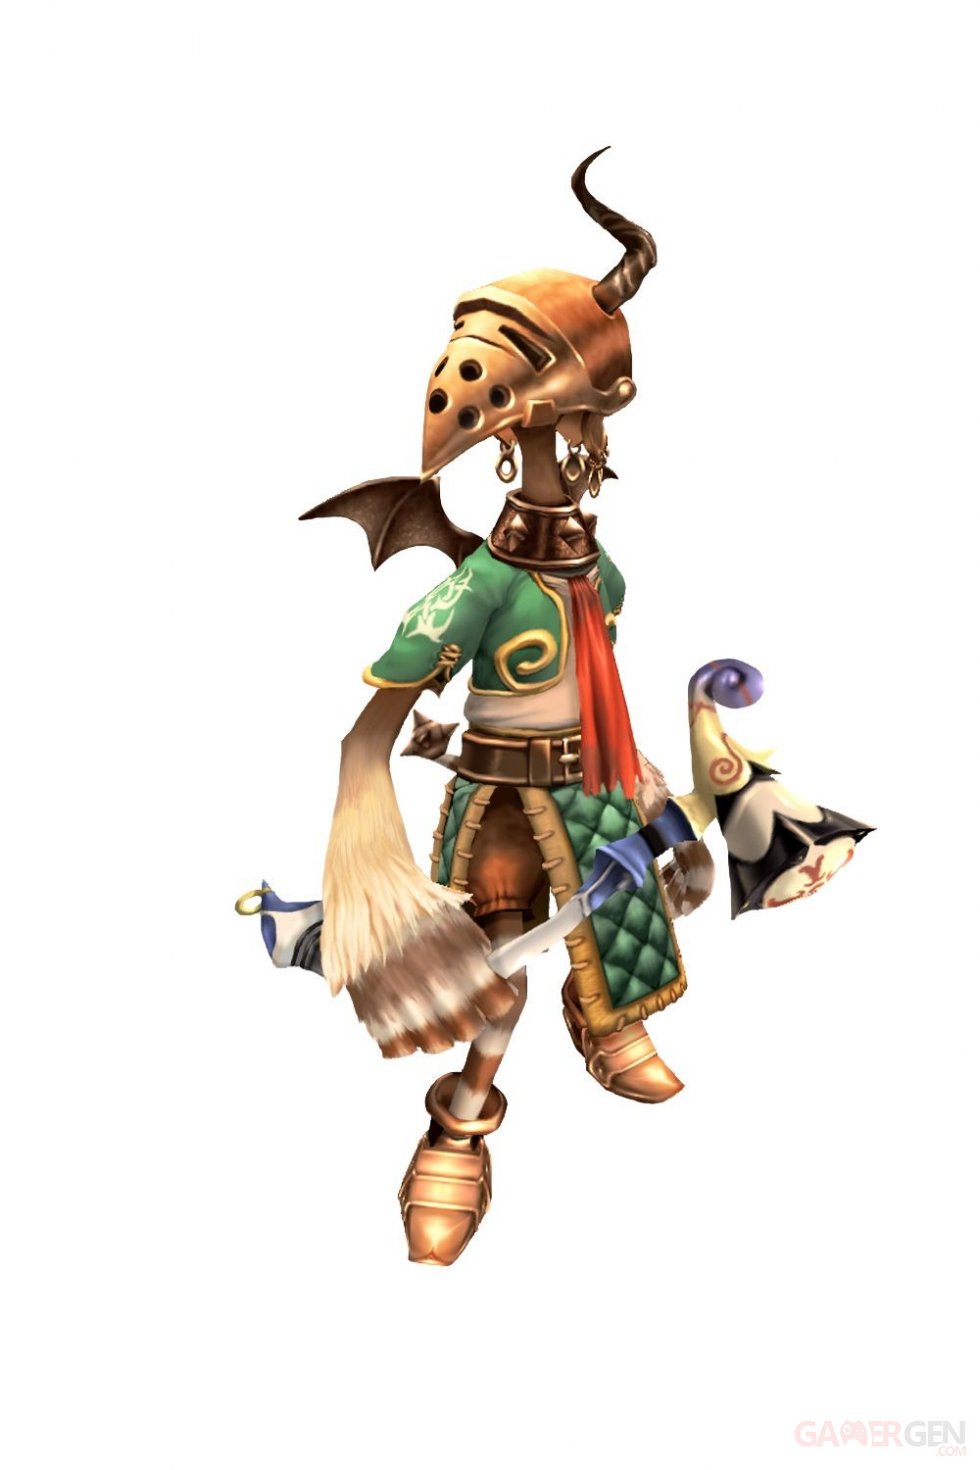 Final-Fantasy-Crystal-Chronicles-Remastered-Edition-18-13-09-2019